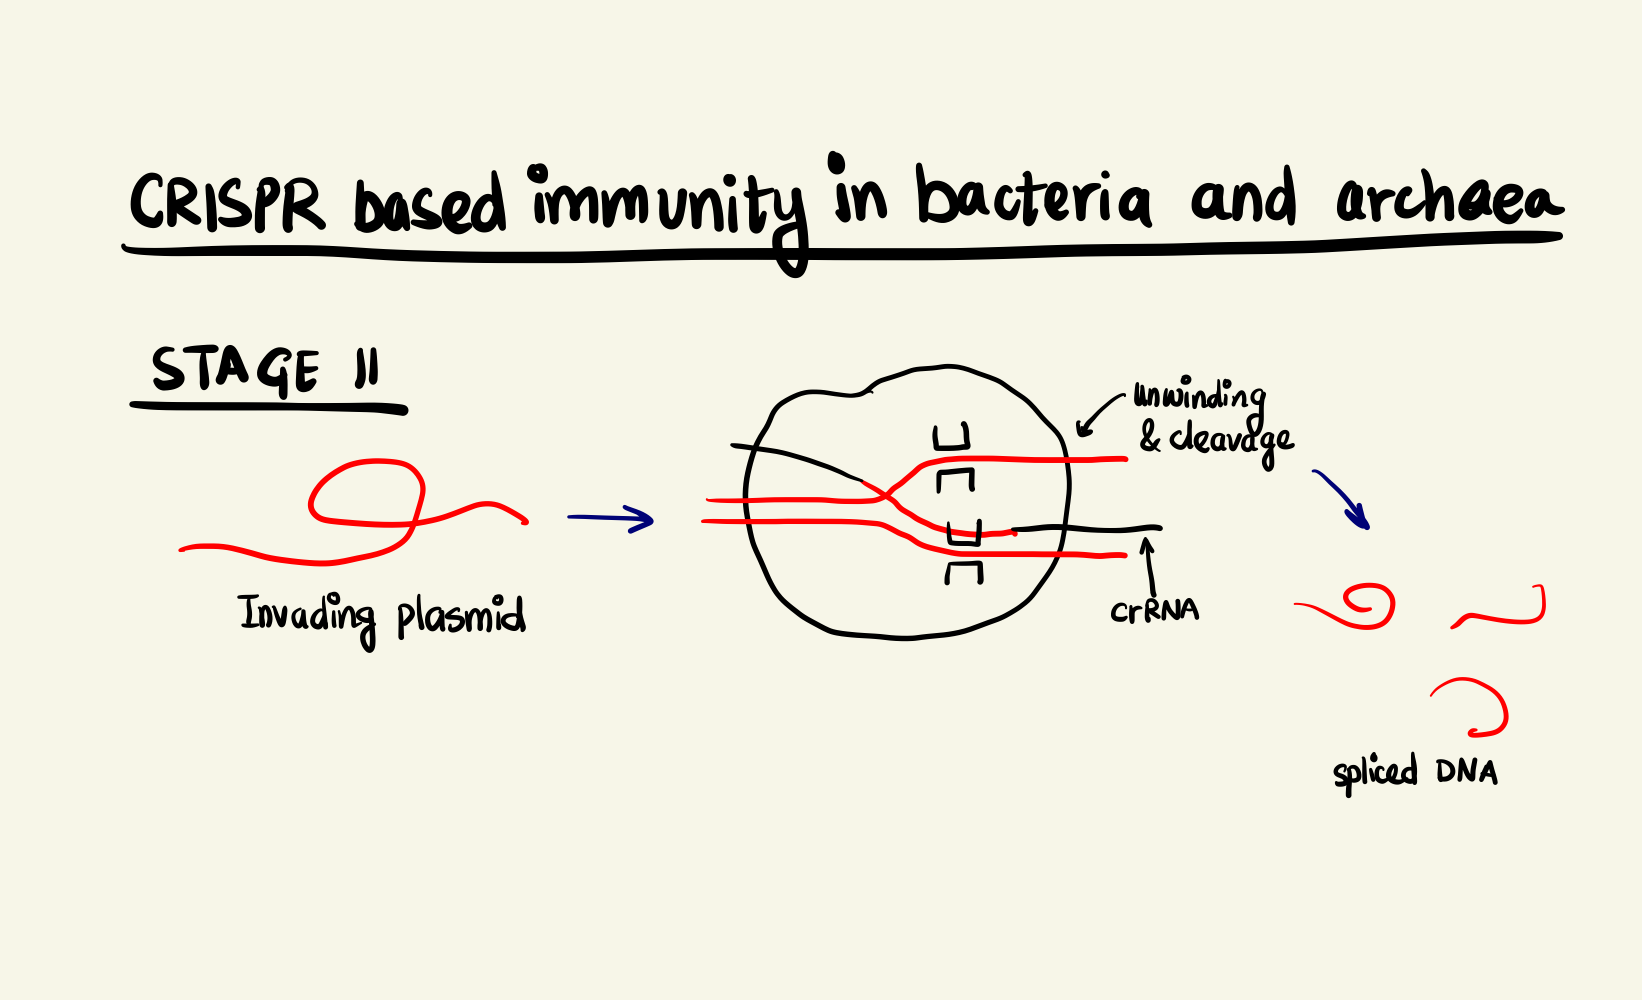 Adaptive Immunity System in bacteria and archaea, stage 2